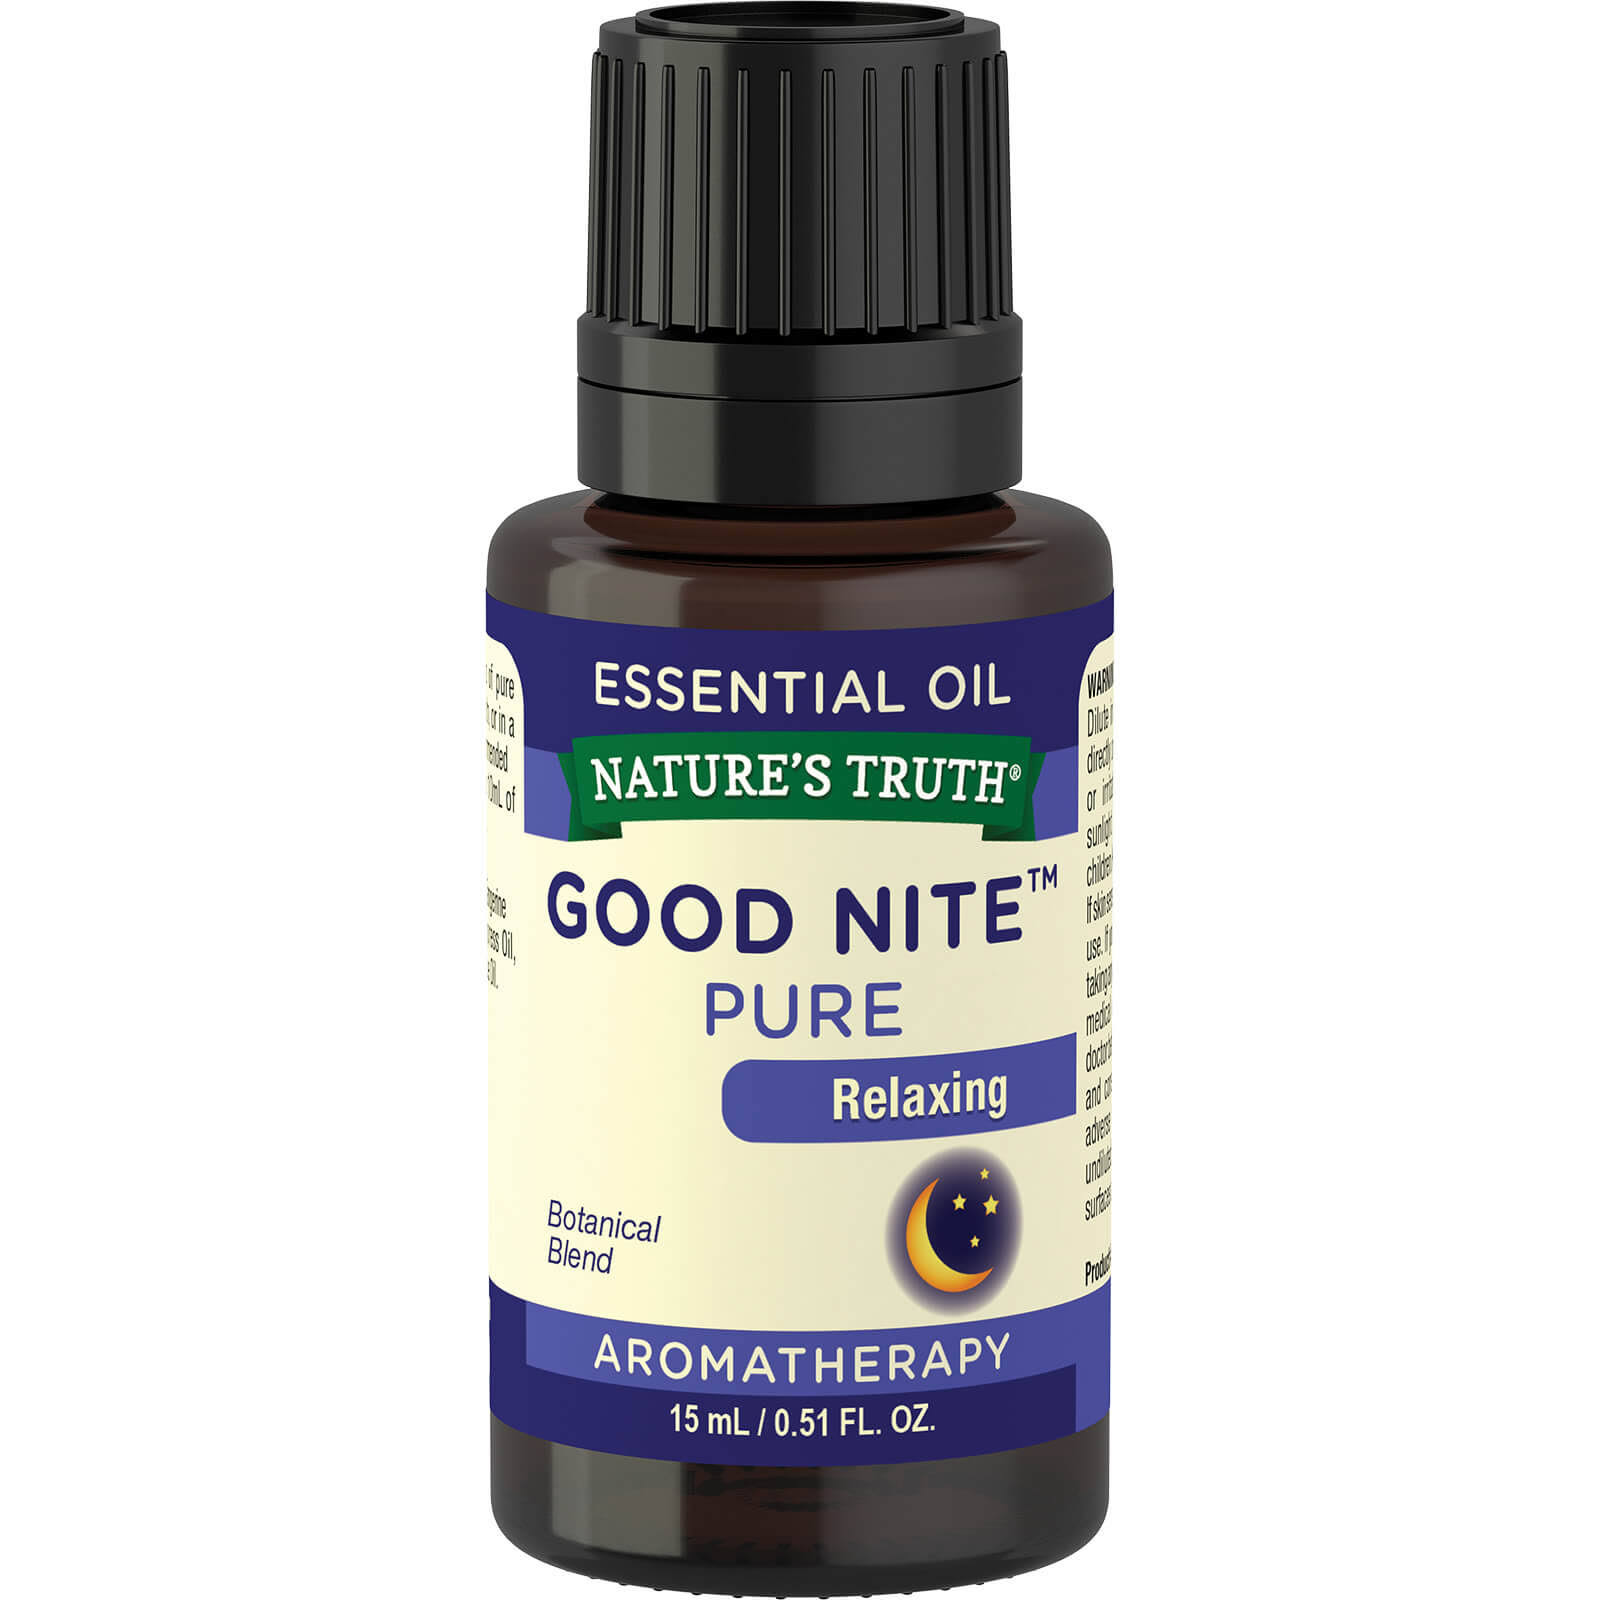 Nature's Truth Good Nite Aromatherapy Essential Oil - Calming, 0.51oz